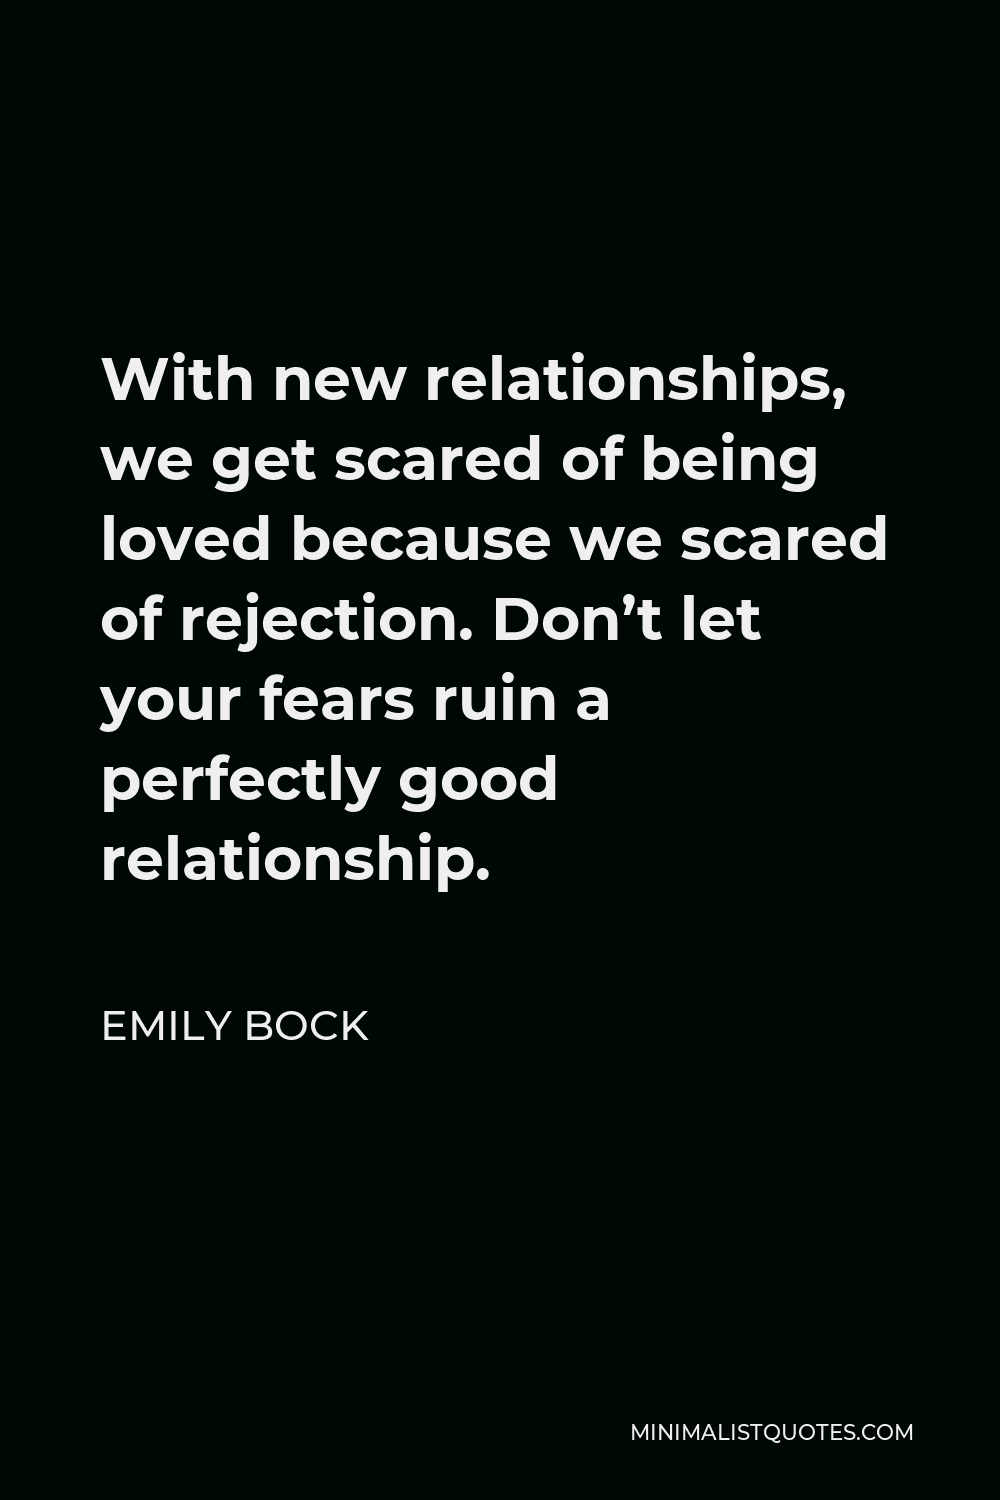 Emily Bock Quote - With new relationships, we get scared of being loved because we scared of rejection. Don’t let your fears ruin a perfectly good relationship.